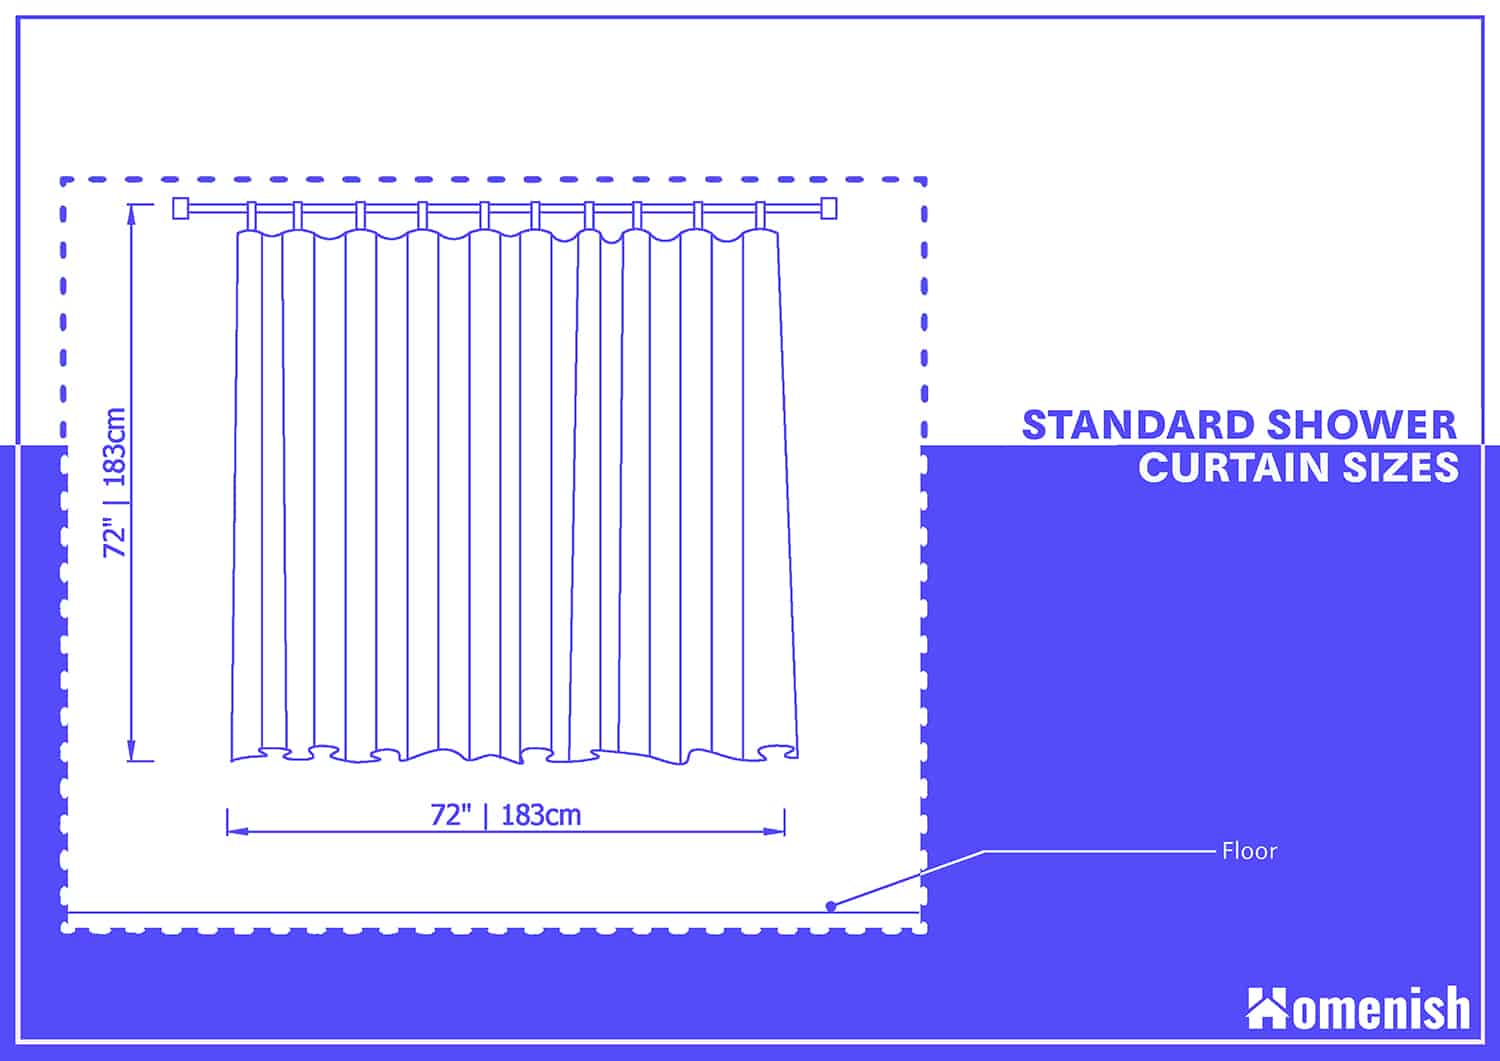 Standard Shower Curtain Size, What Are The Lengths Of Shower Curtains